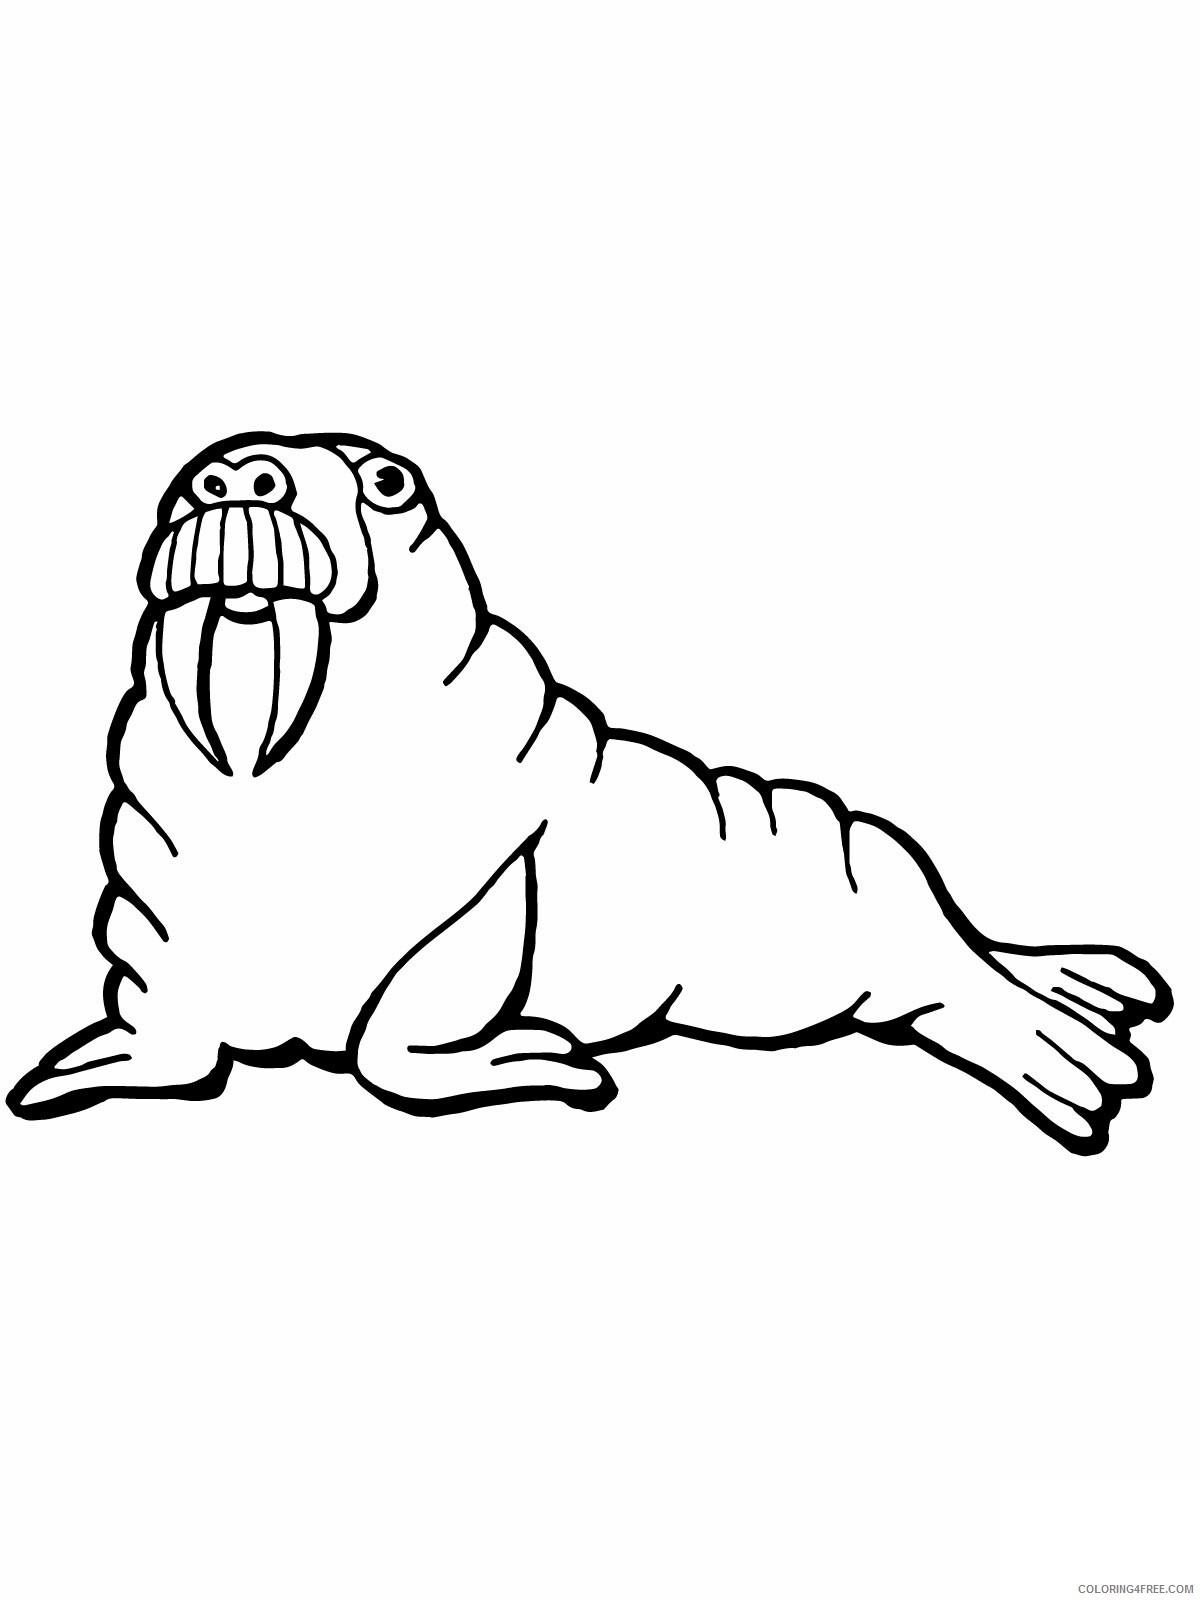 Walrus Coloring Pages Animal Printable Sheets Free Walrus 2021 4954 Coloring4free